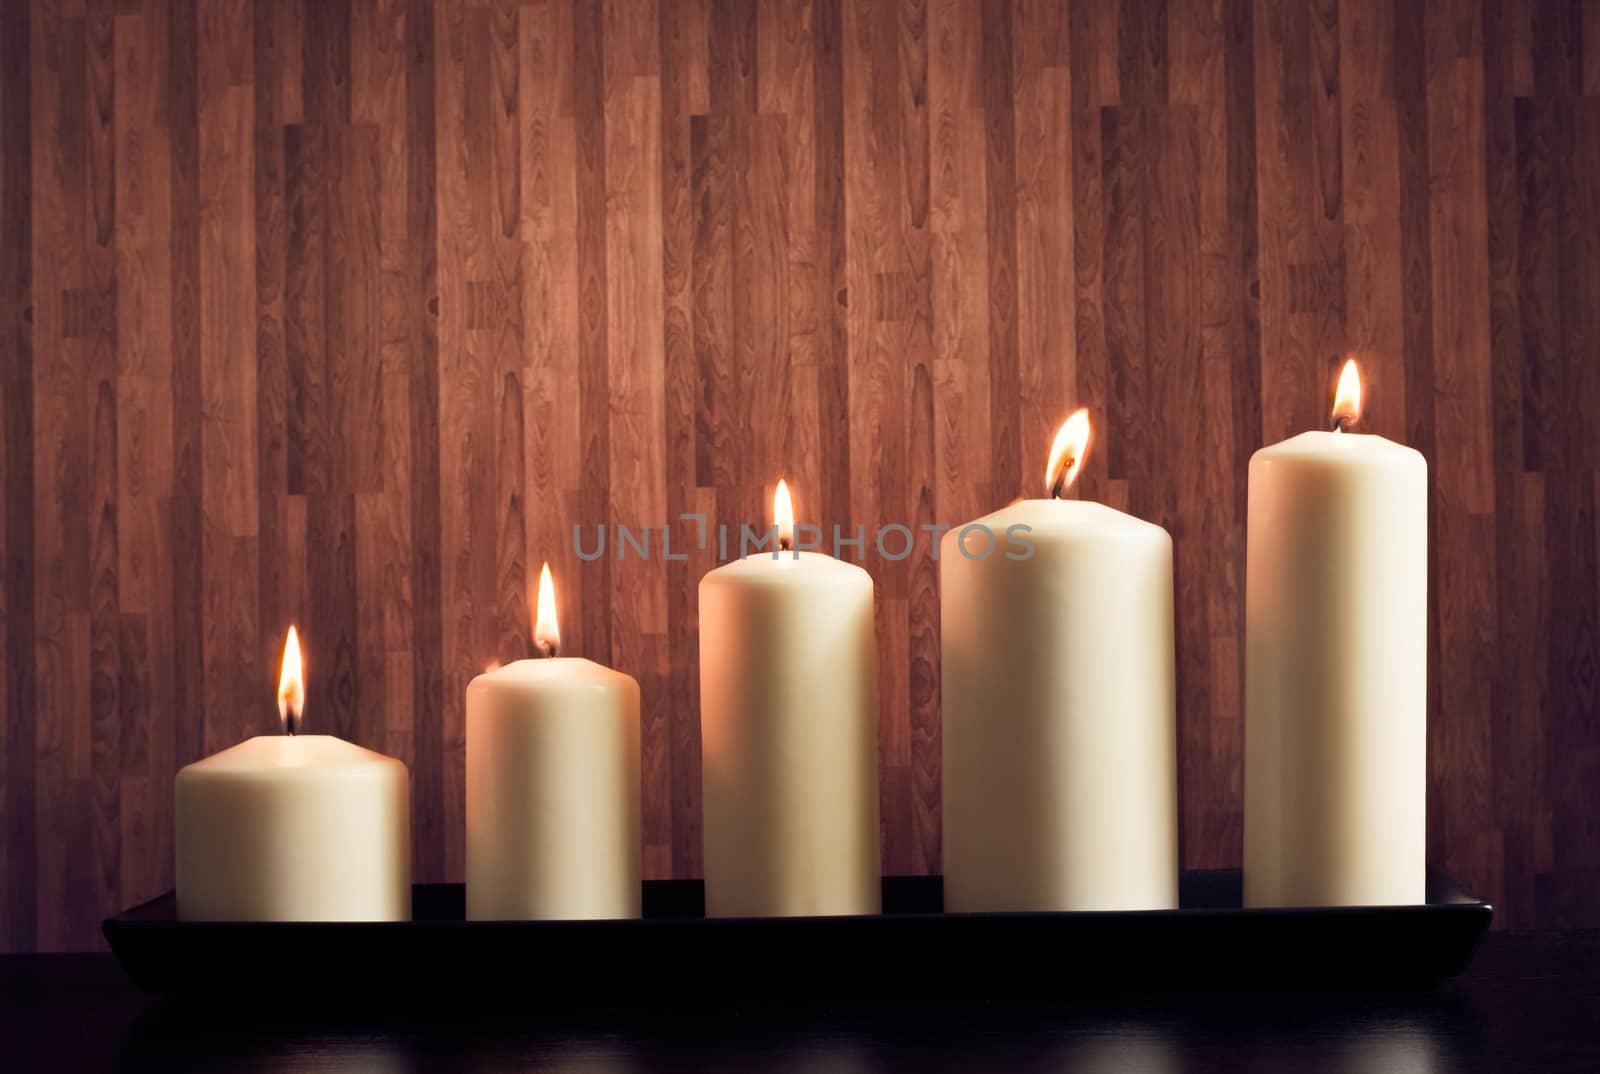 white candles on warm atmosphere and old wooden background